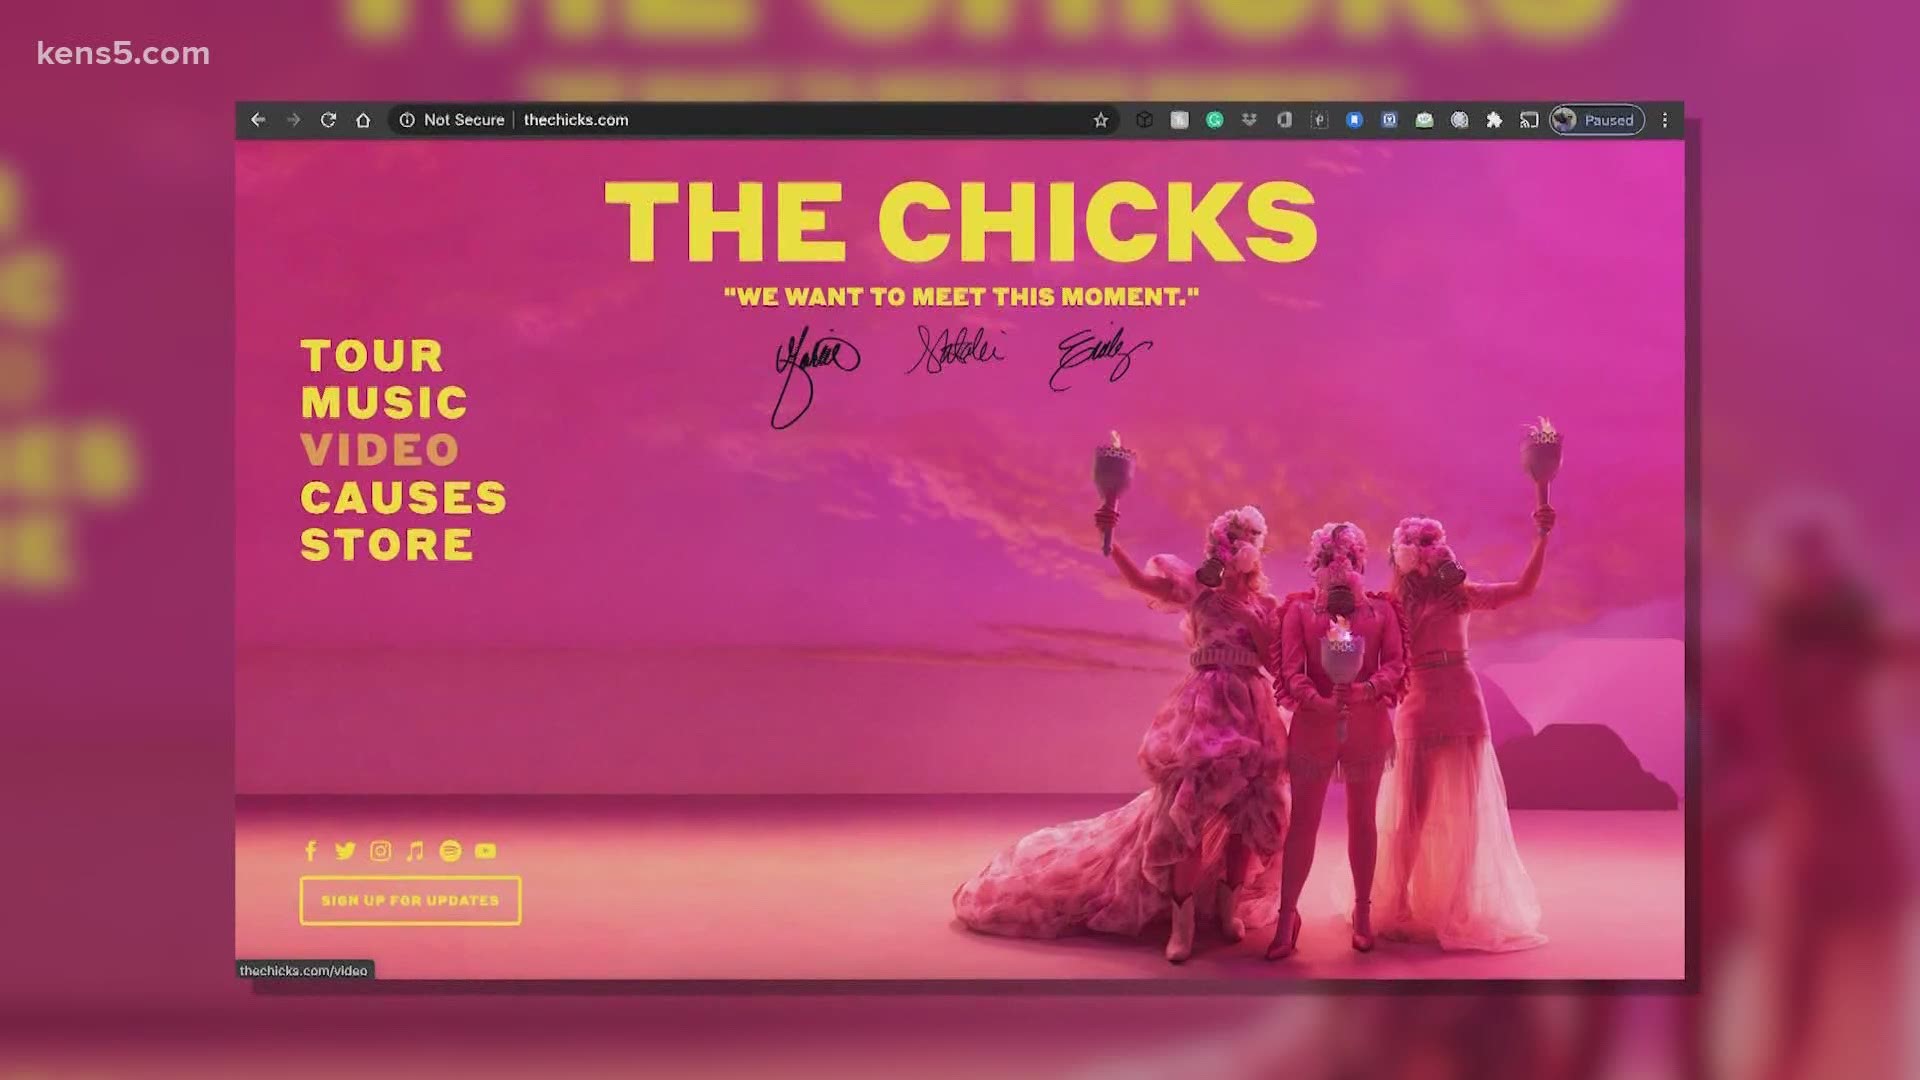 The Dixie Chicks dropped the word "Dixie" and are now known as The Chicks.